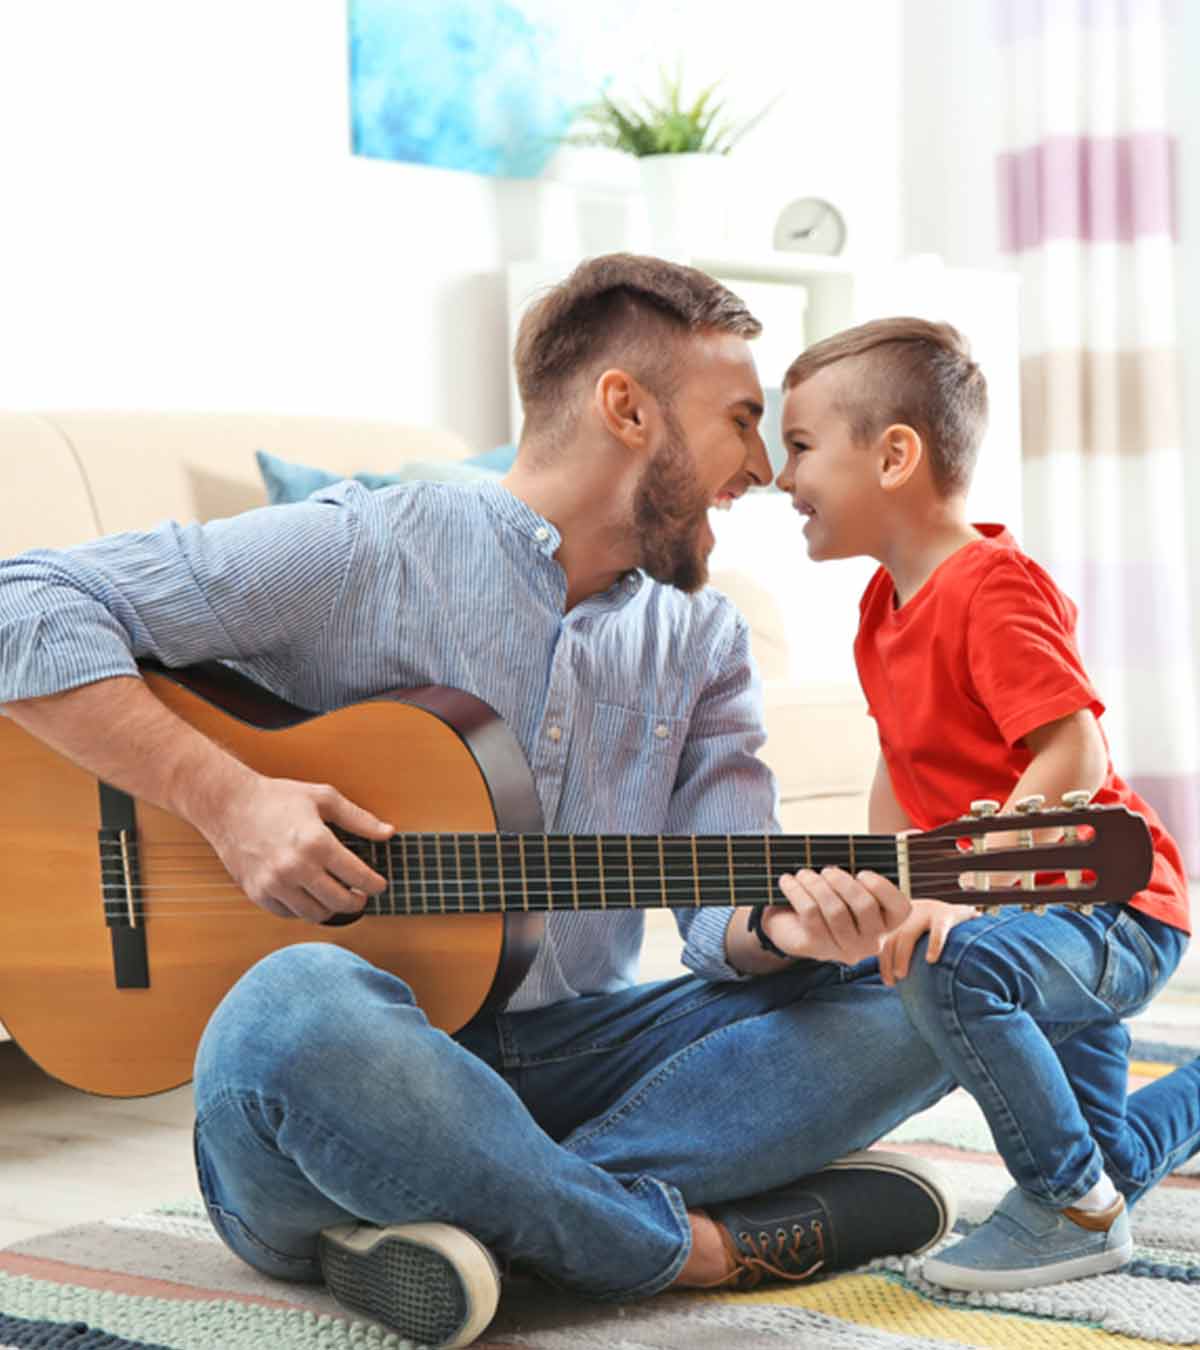 54 Most Beautiful And Popular Songs About Parenting